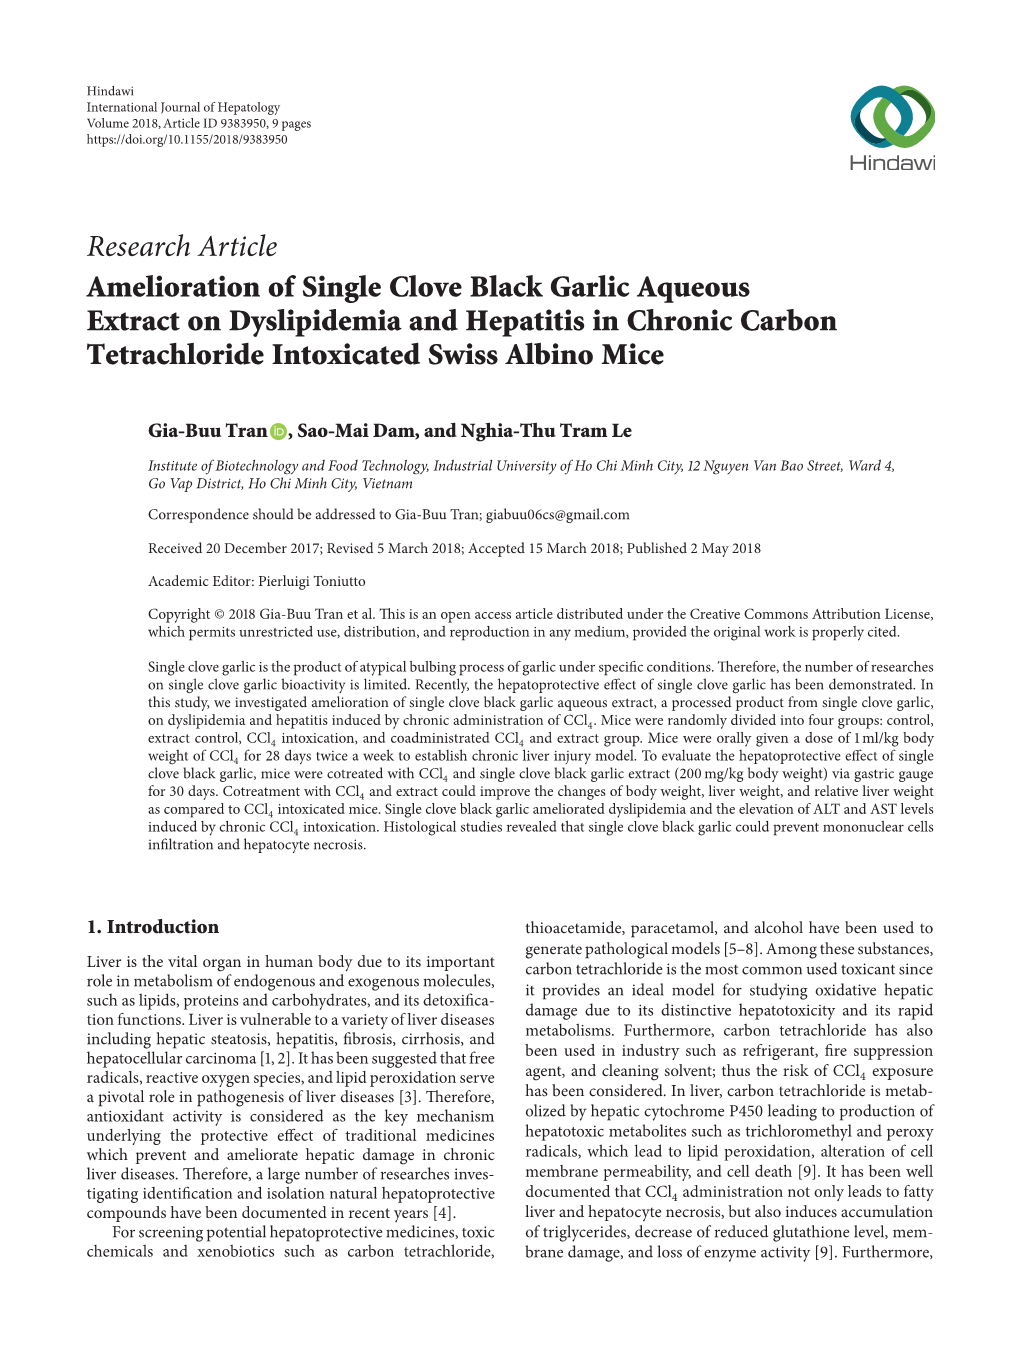 Amelioration of Single Clove Black Garlic Aqueous Extract on Dyslipidemia and Hepatitis in Chronic Carbon Tetrachloride Intoxicated Swiss Albino Mice